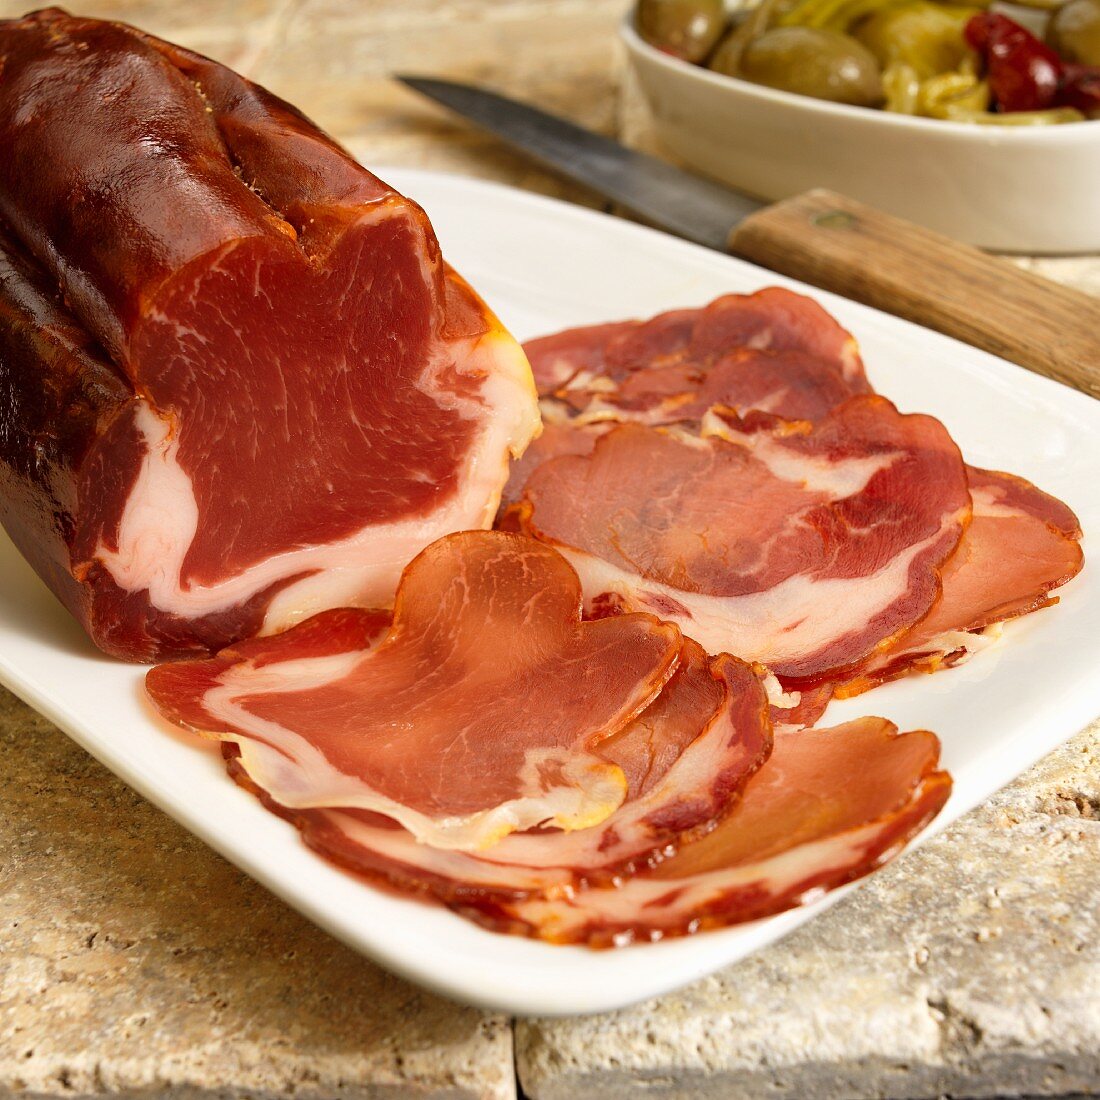 Partially Sliced Dried Cured Spanish Pork Loin on a Platter